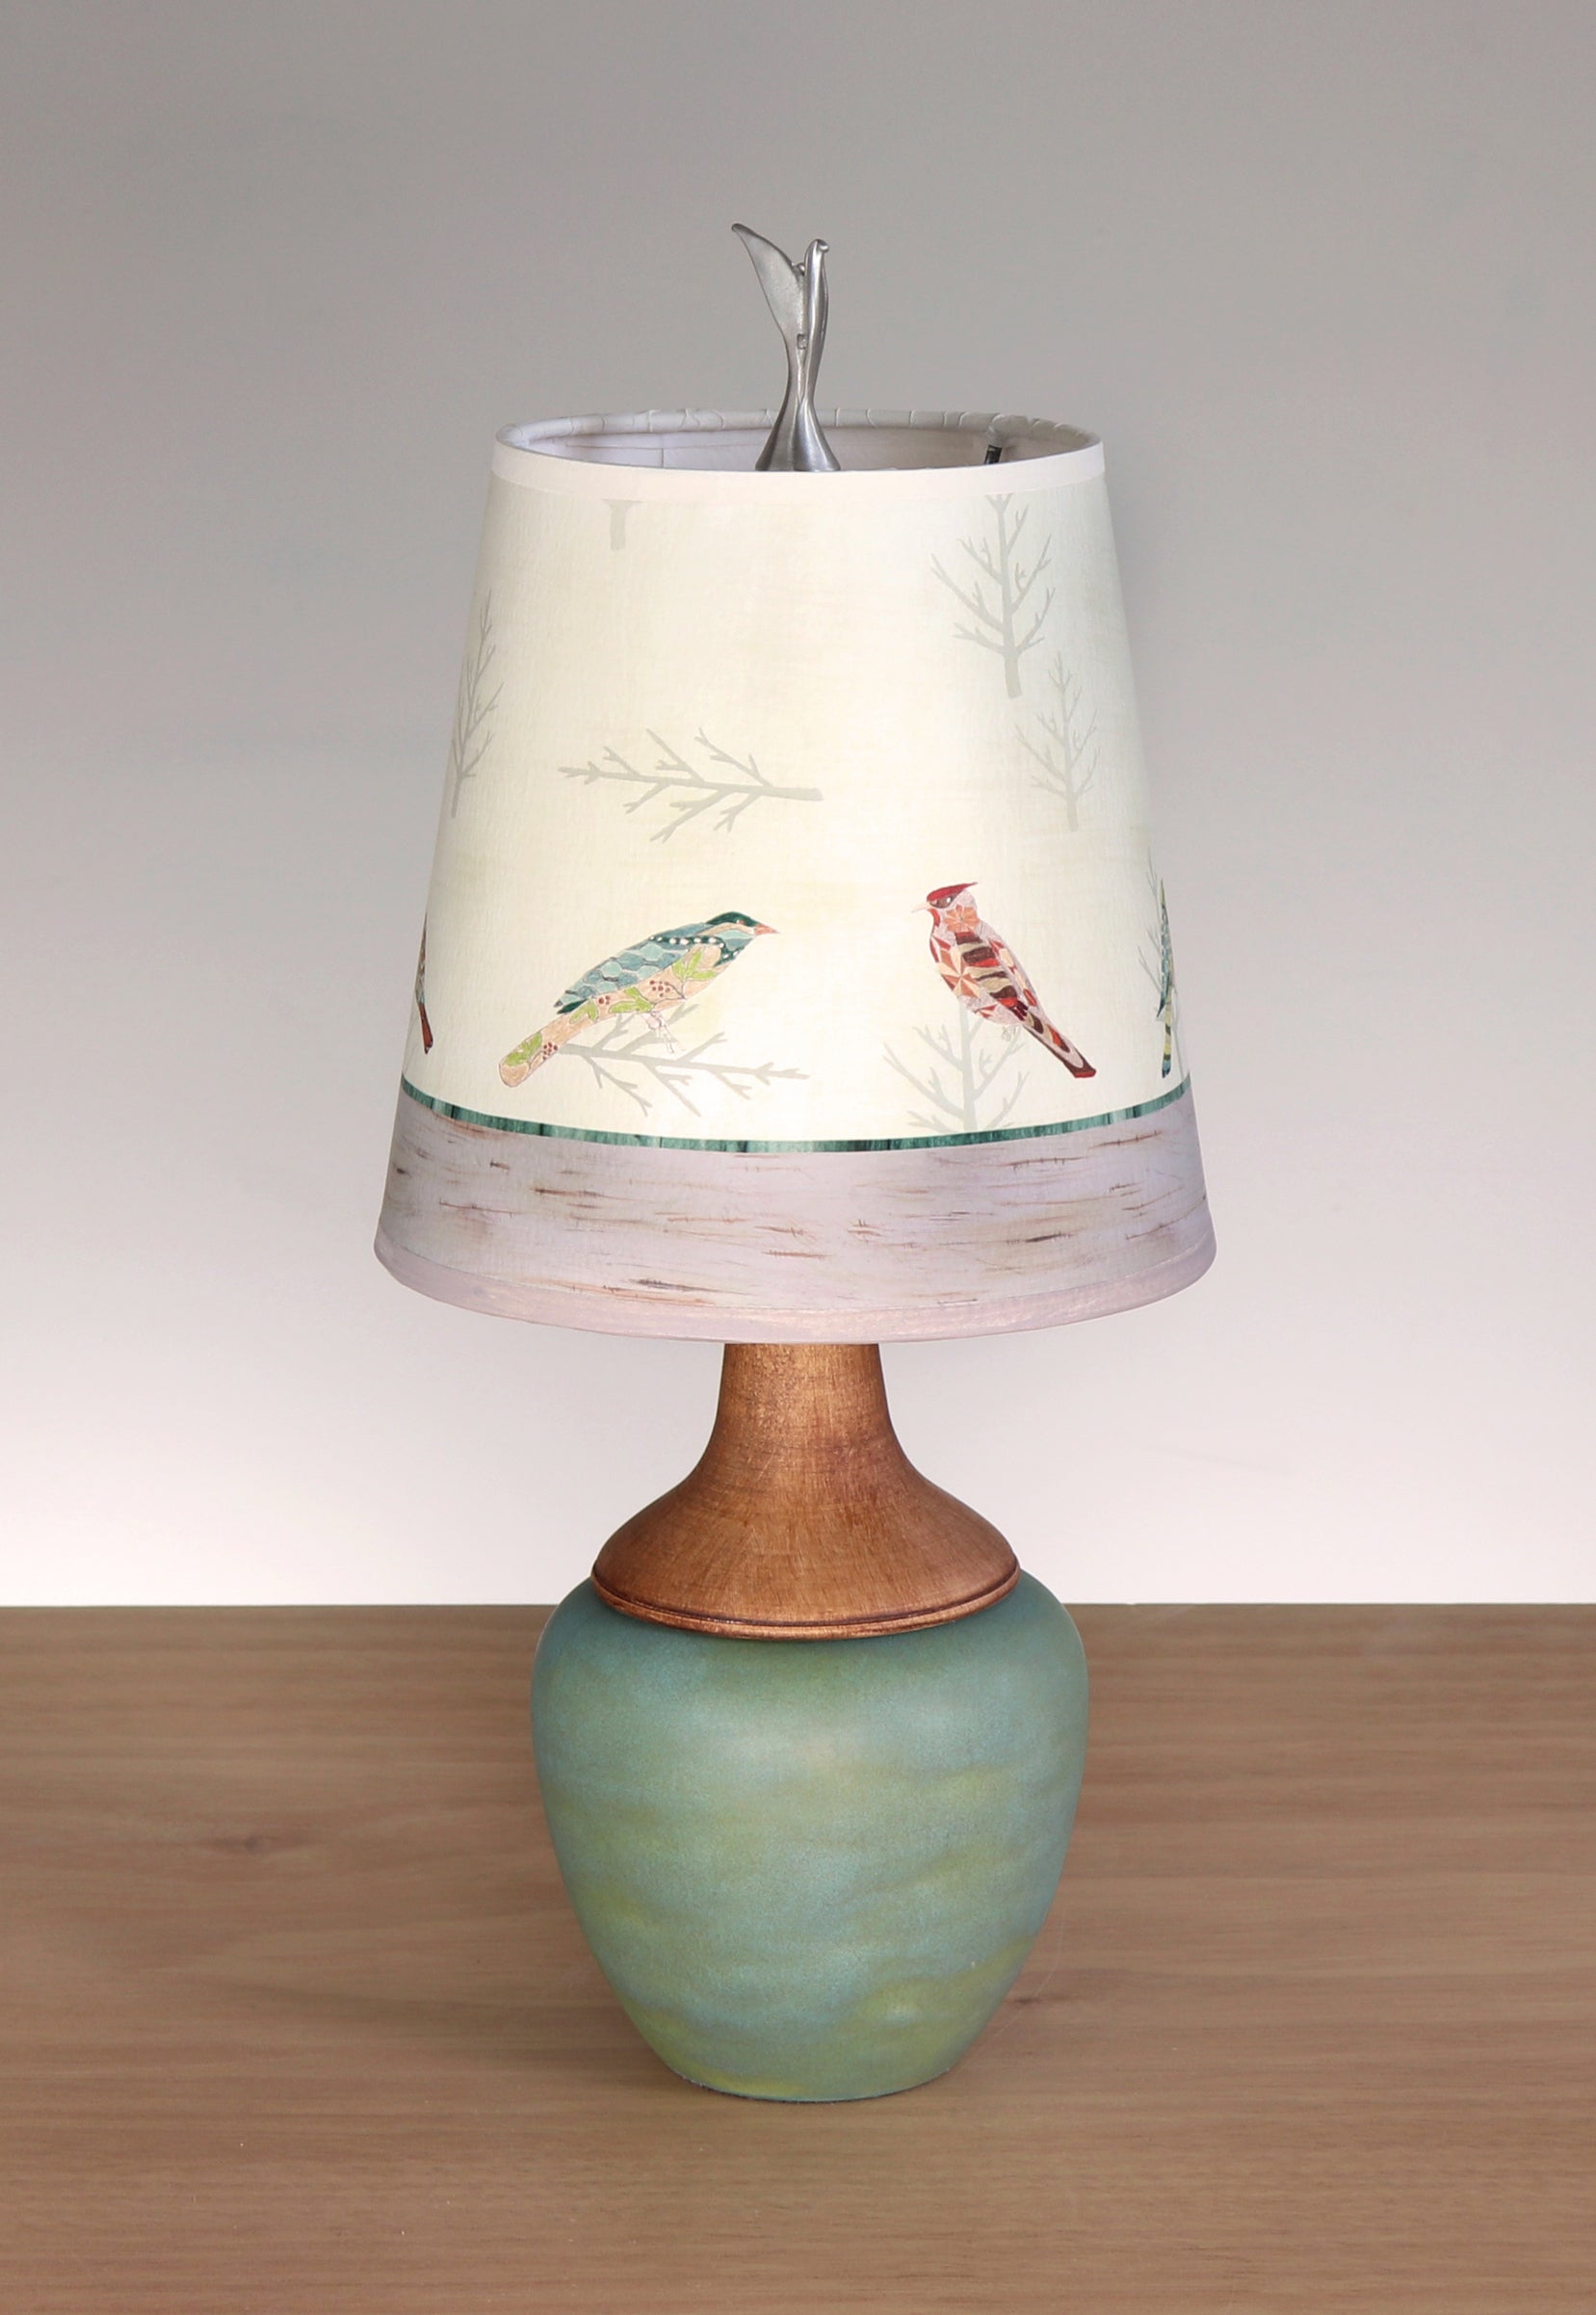 Janna Ugone & Co Table Lamps Ceramic and Maple Table Lamp with Small Drum Shade in Bird Friends